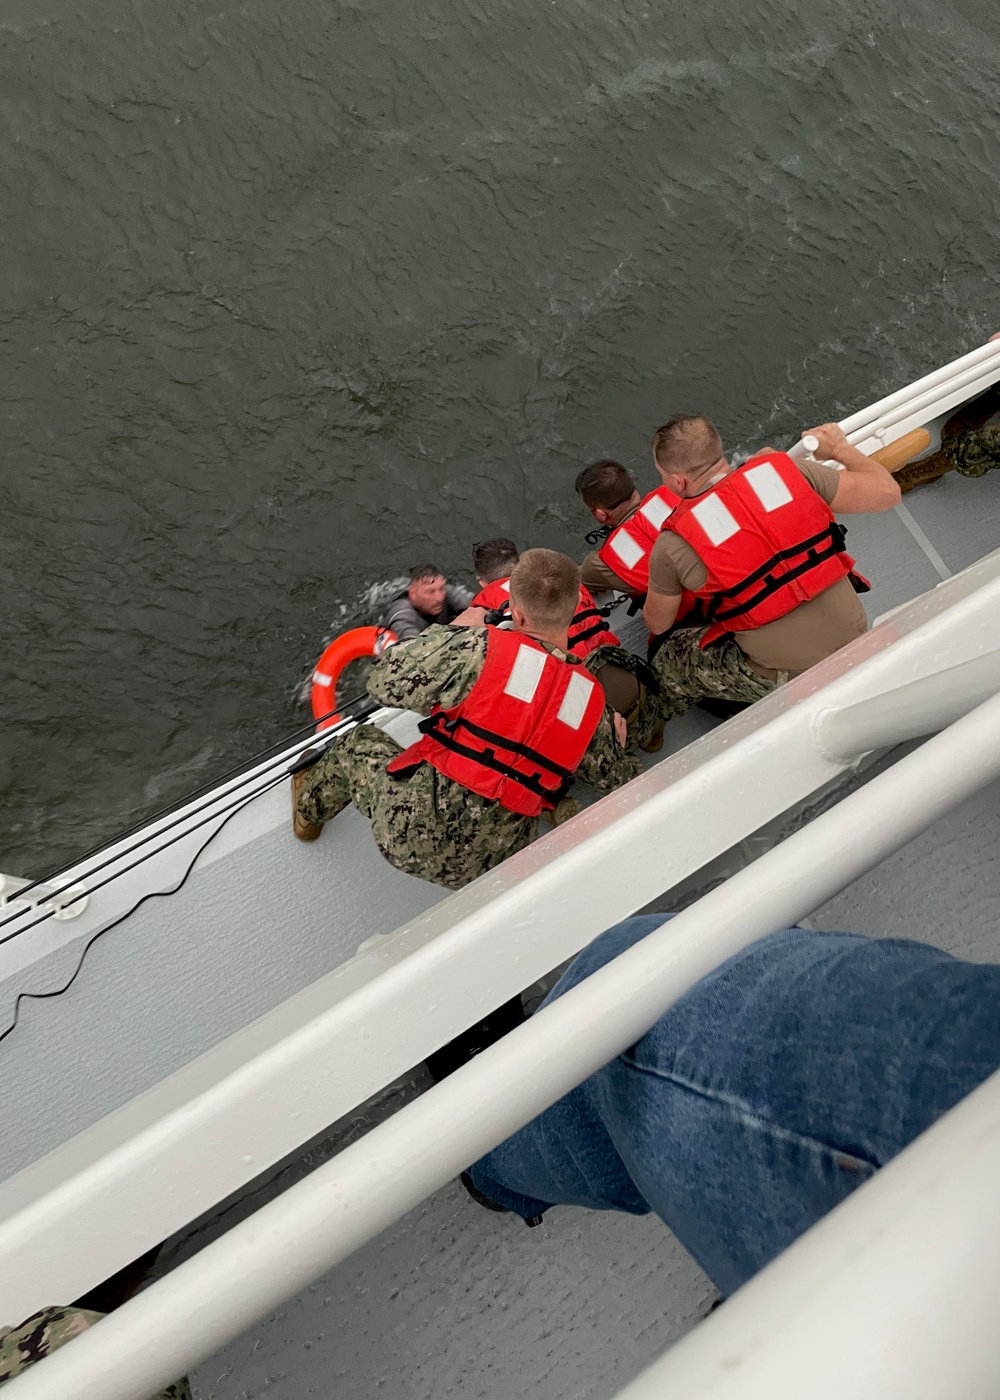 Coast Guard, good Samaritans rescue 6 people from capsized vessel 8 miles south of Grand Isle, searching for more